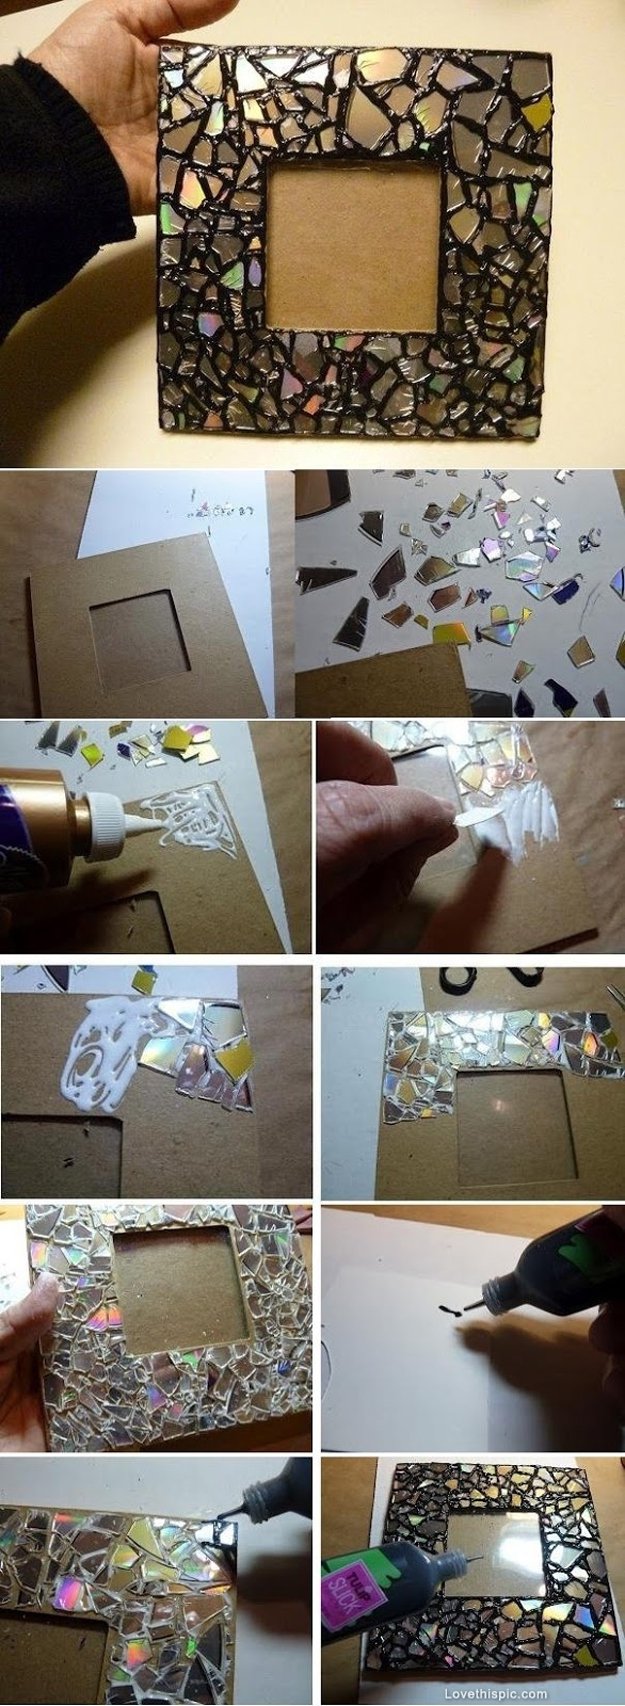 Best DIY Picture Frames and Photo Frame Ideas - DIY Mosaic Frame from Old CDs - How To Make Cool Handmade Projects from Wood, Canvas, Instagram Photos. Creative Birthday Gifts, Fun Crafts for Friends and Wall Art Tutorials #diyideas #diygifts #teencrafts